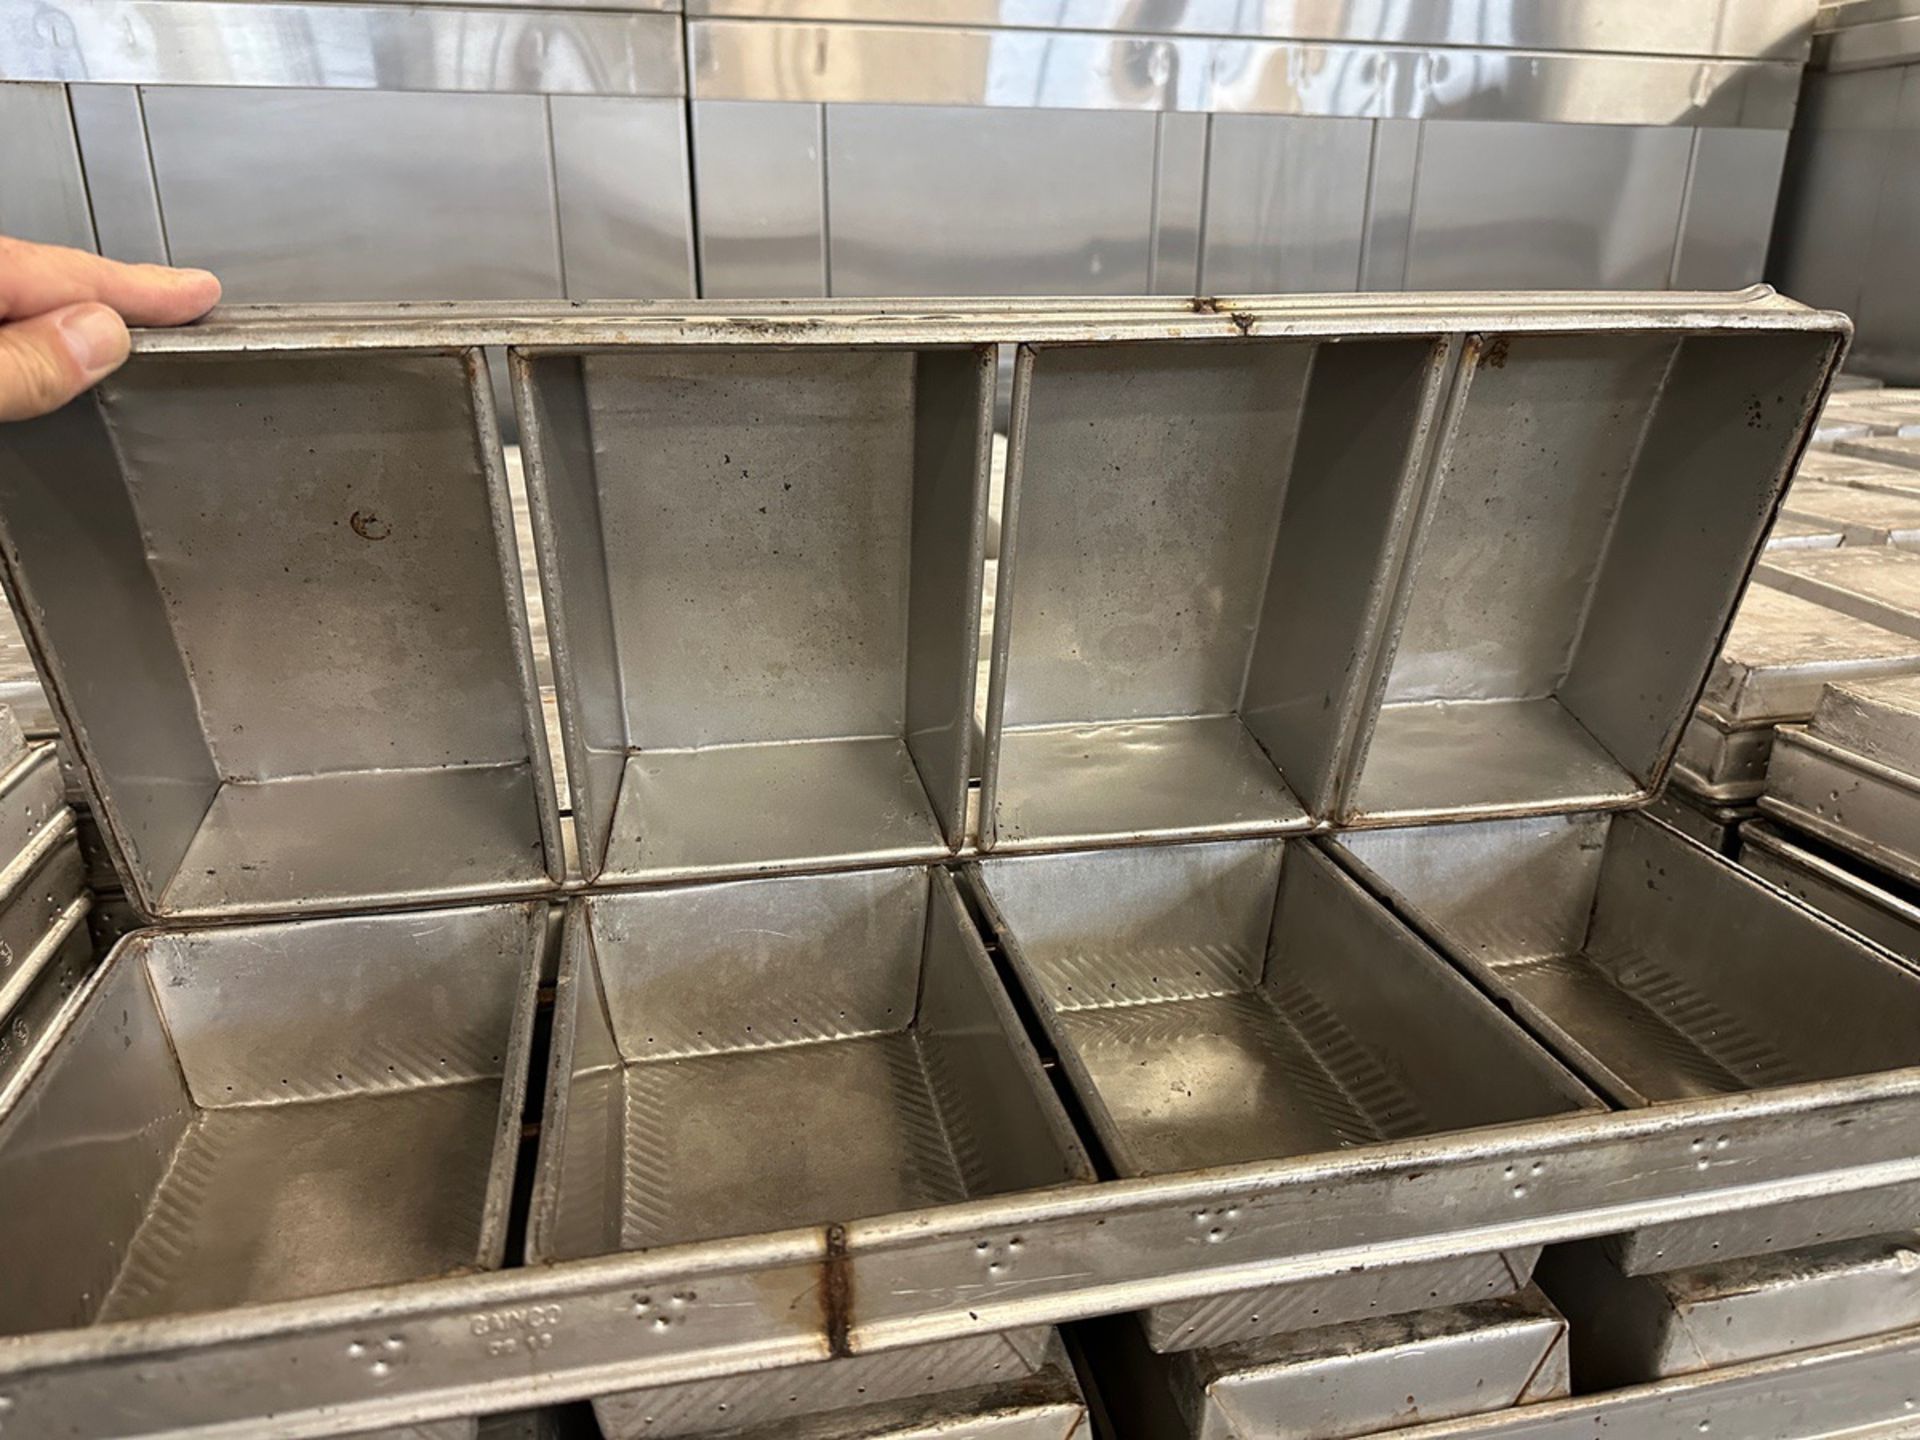 Approx. (189) 4-Loaf Bread Baking Pans on Heavy Duty Pan Cart (Approx. 9" x 25.5") | Rig Fee $50 - Image 2 of 2